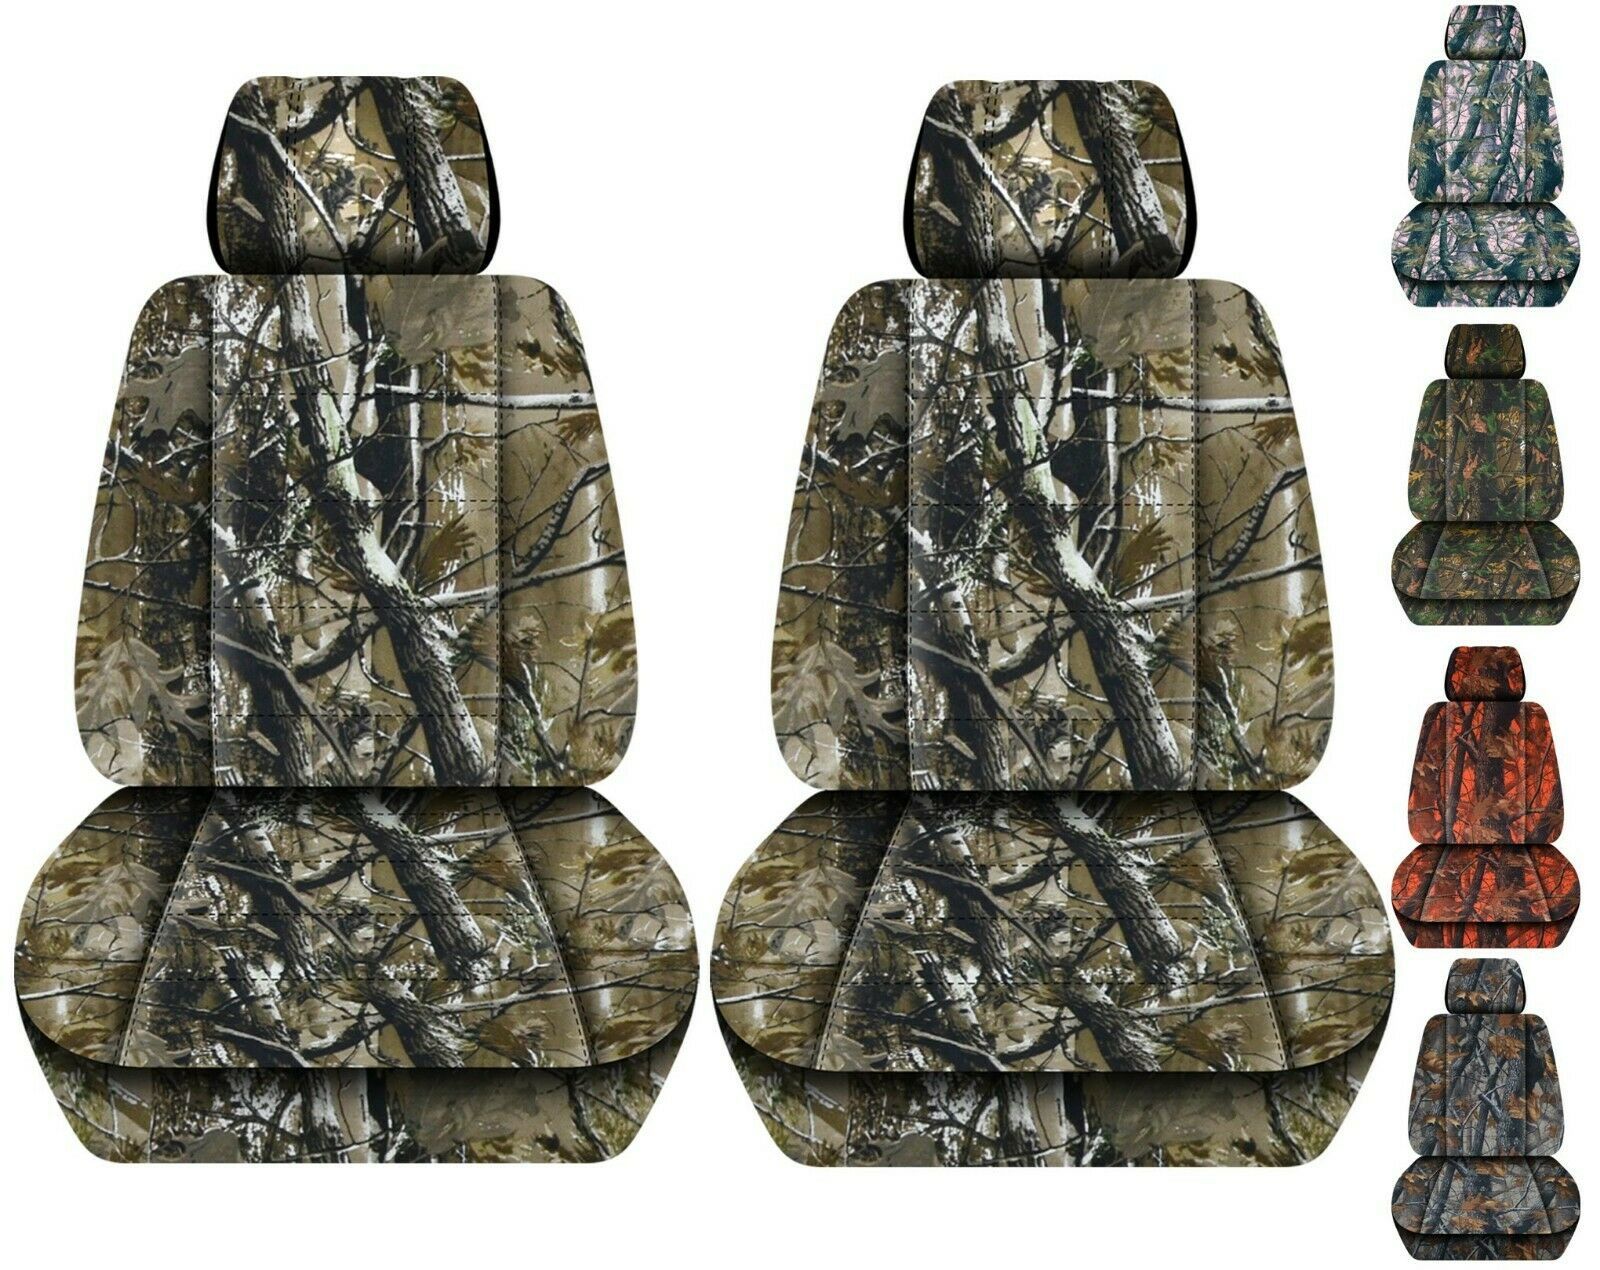 Primary image for Front set car seat covers fits 2008-2021 GMC Sierra 1500/2500/3500  Camouflage